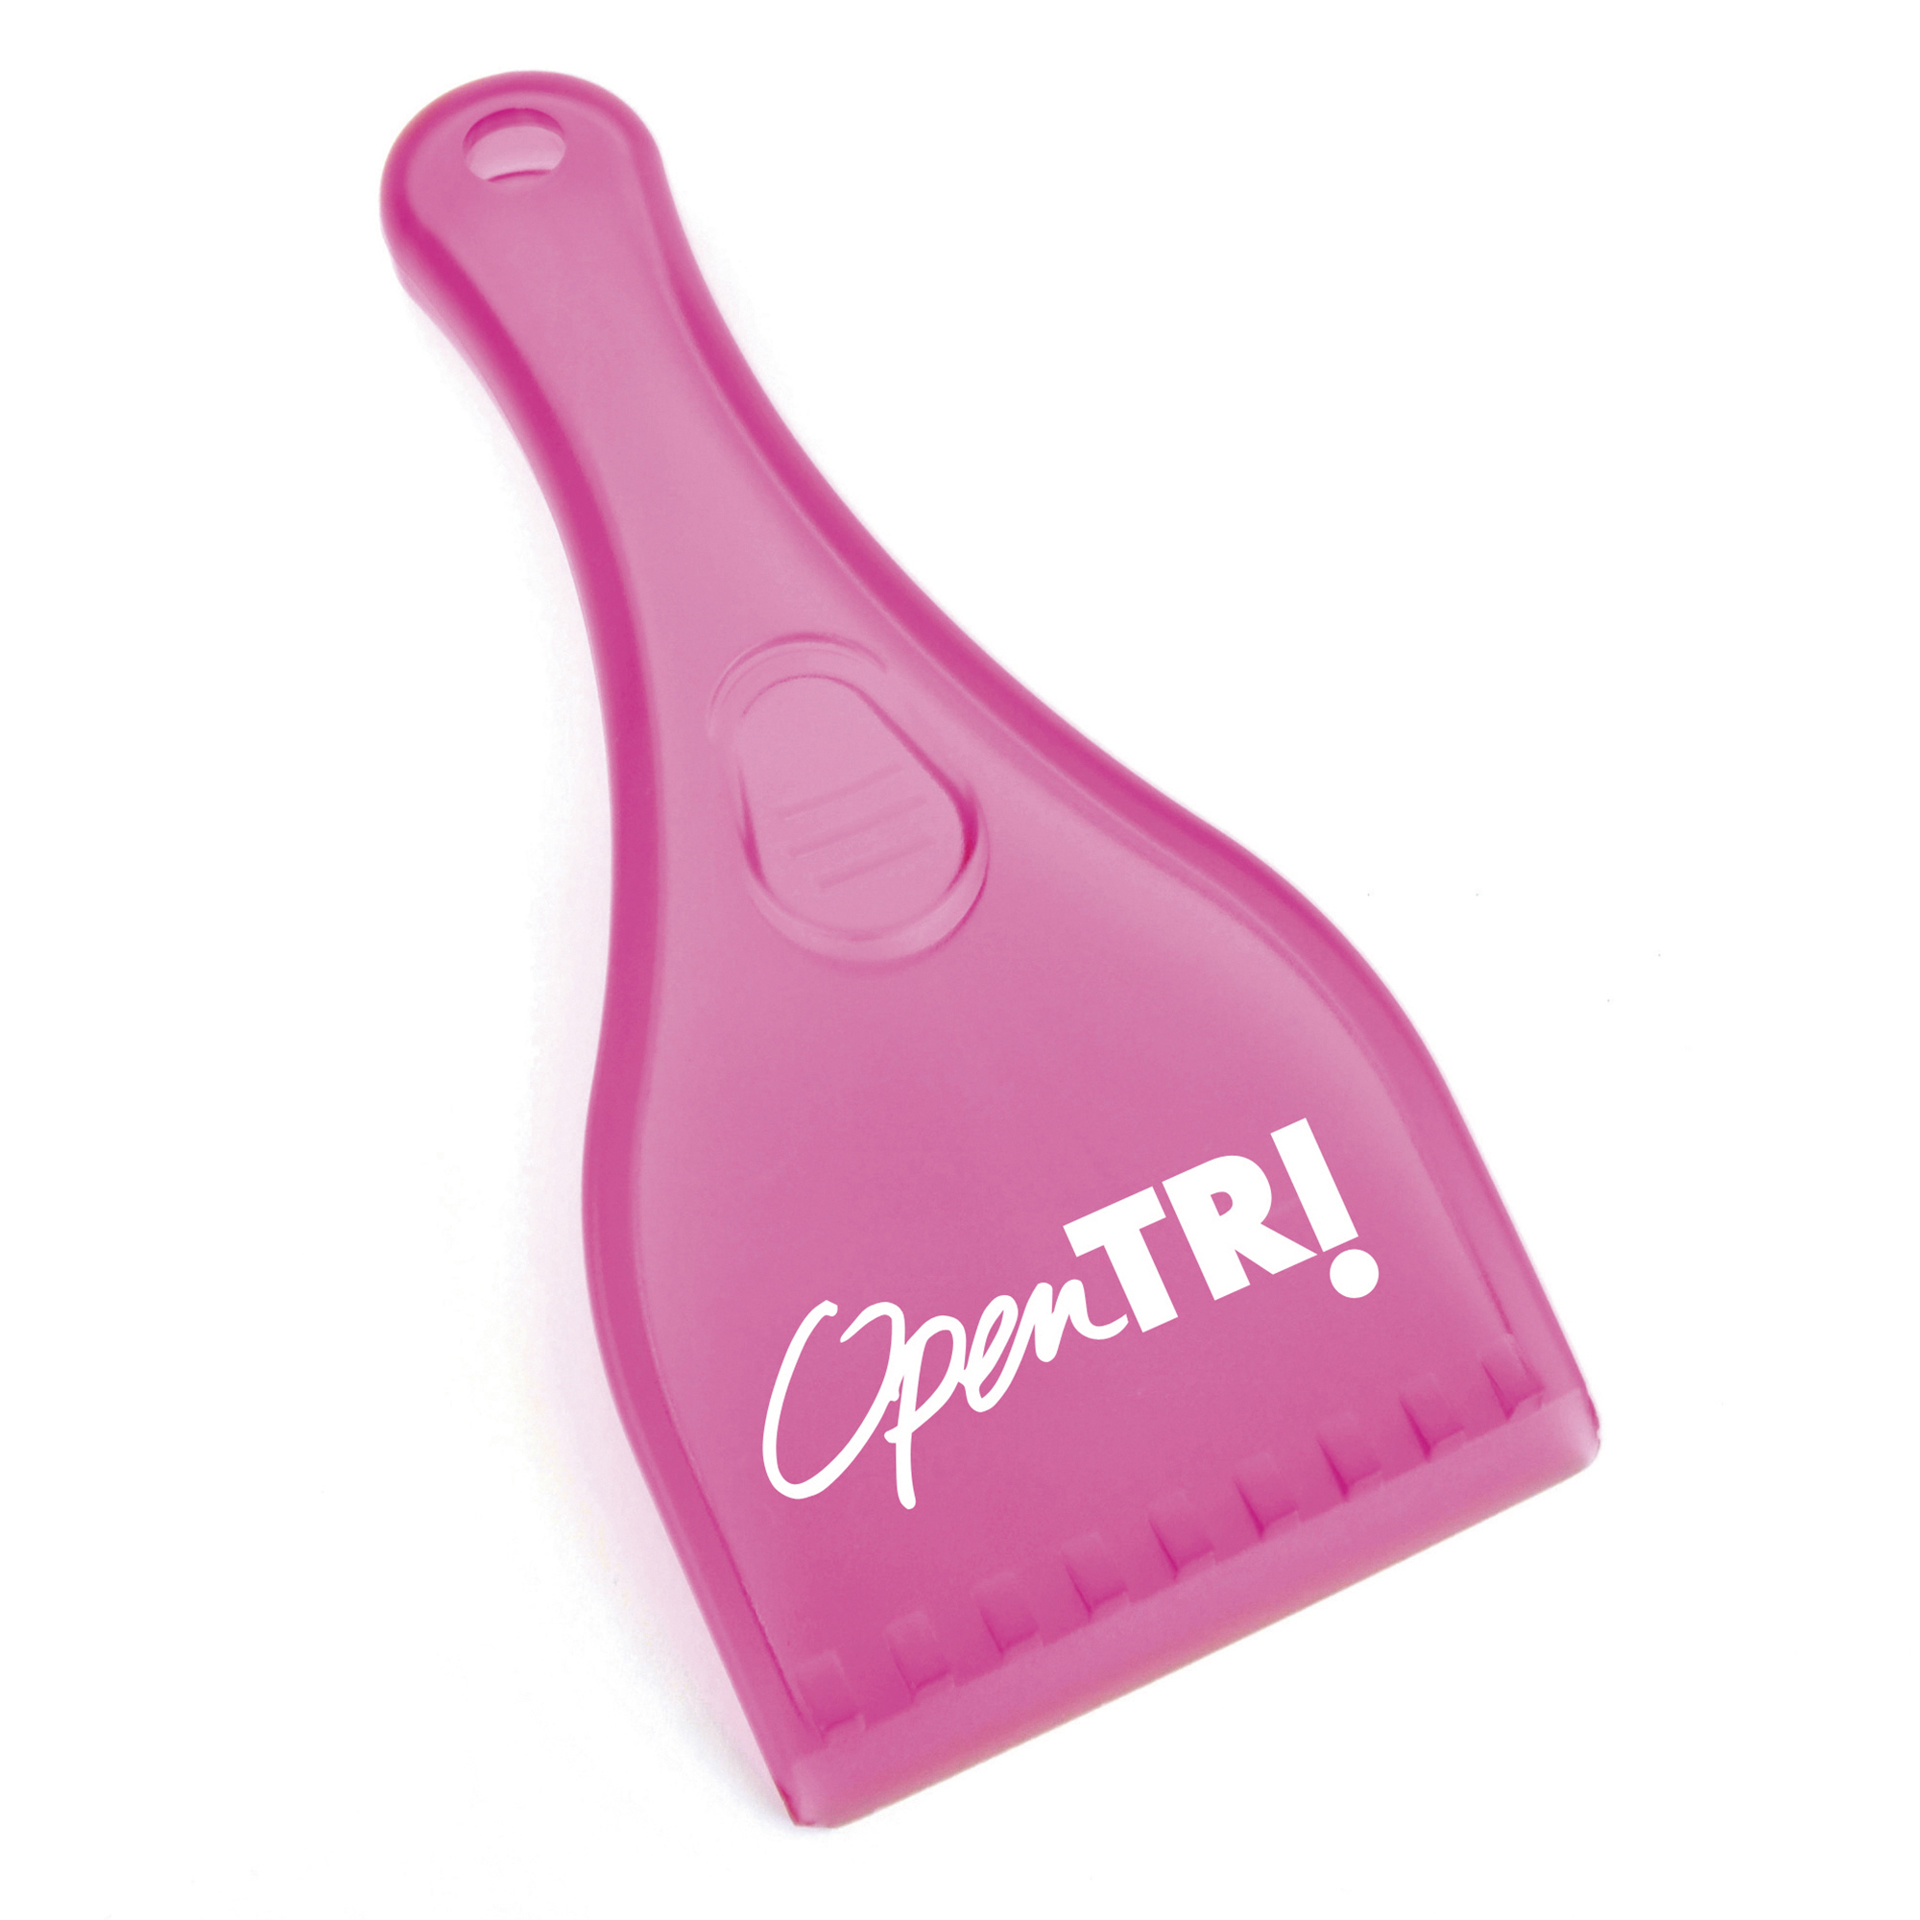 ice scraper with handle in pink with a white logo